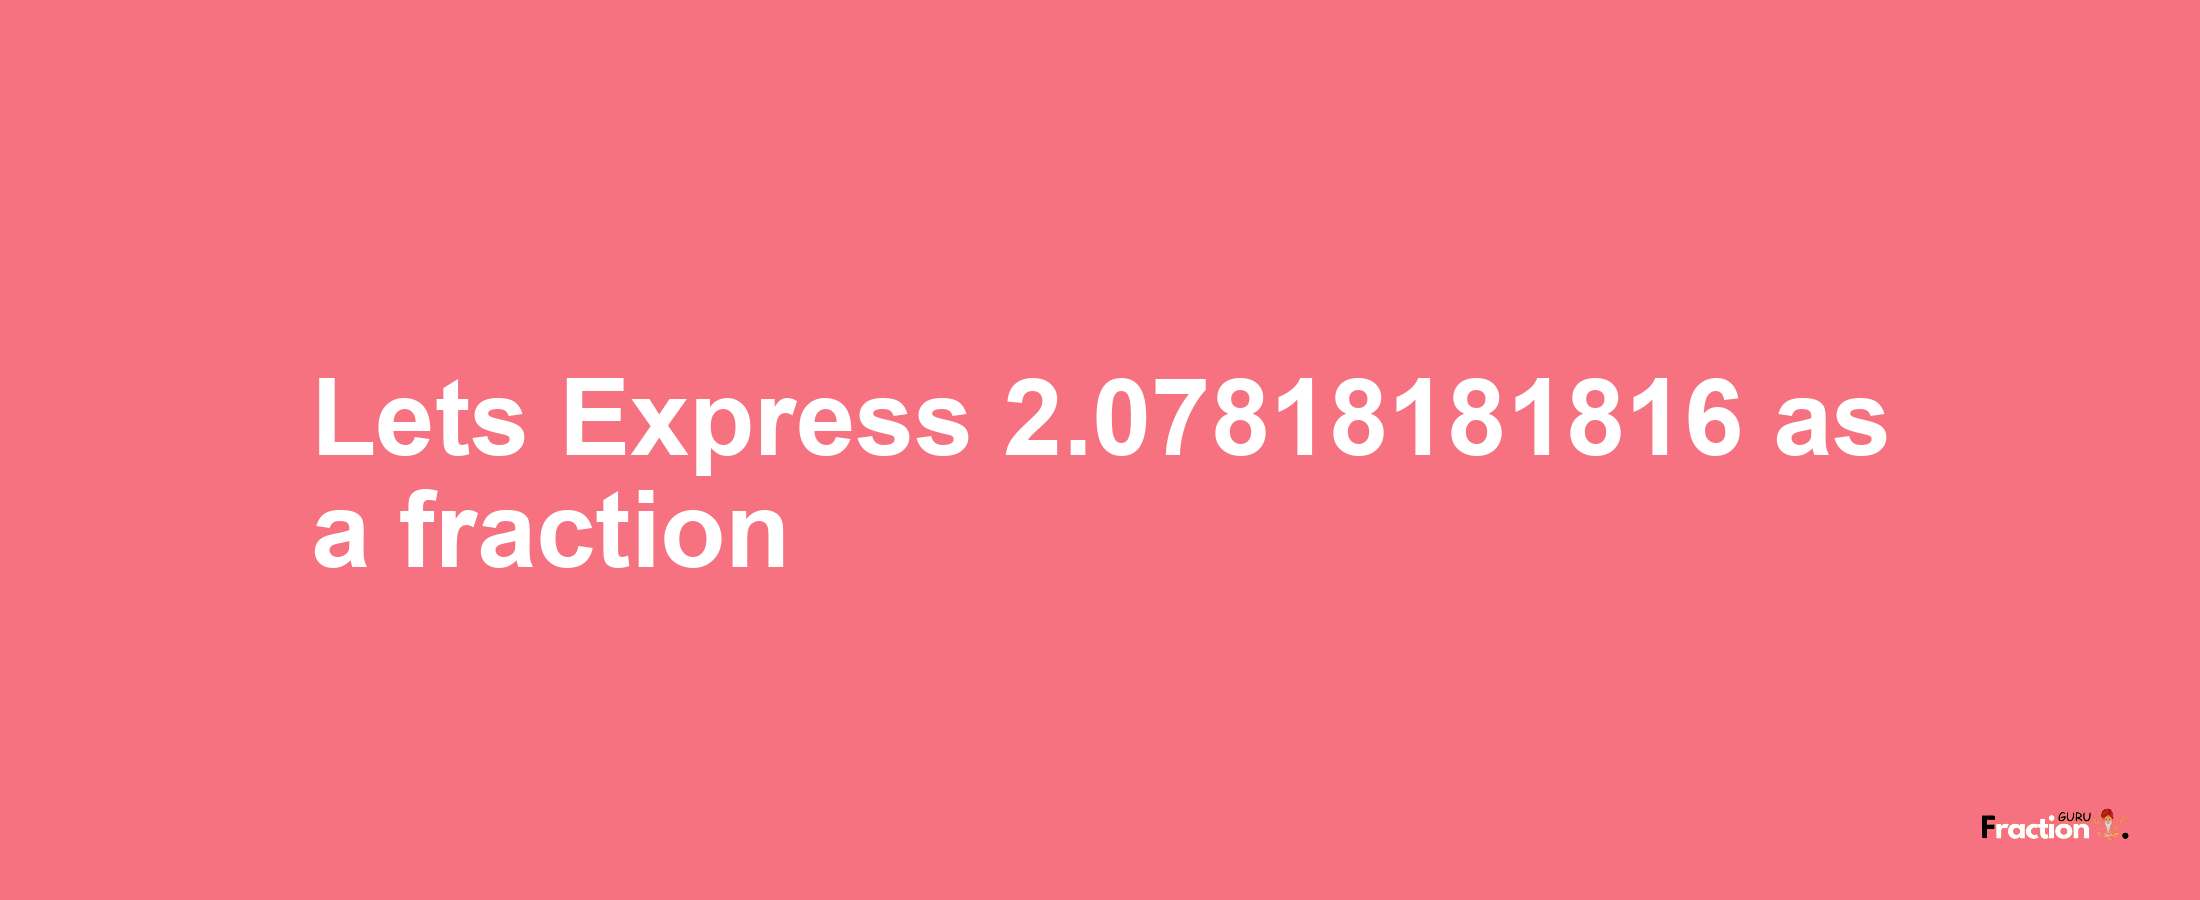 Lets Express 2.07818181816 as afraction